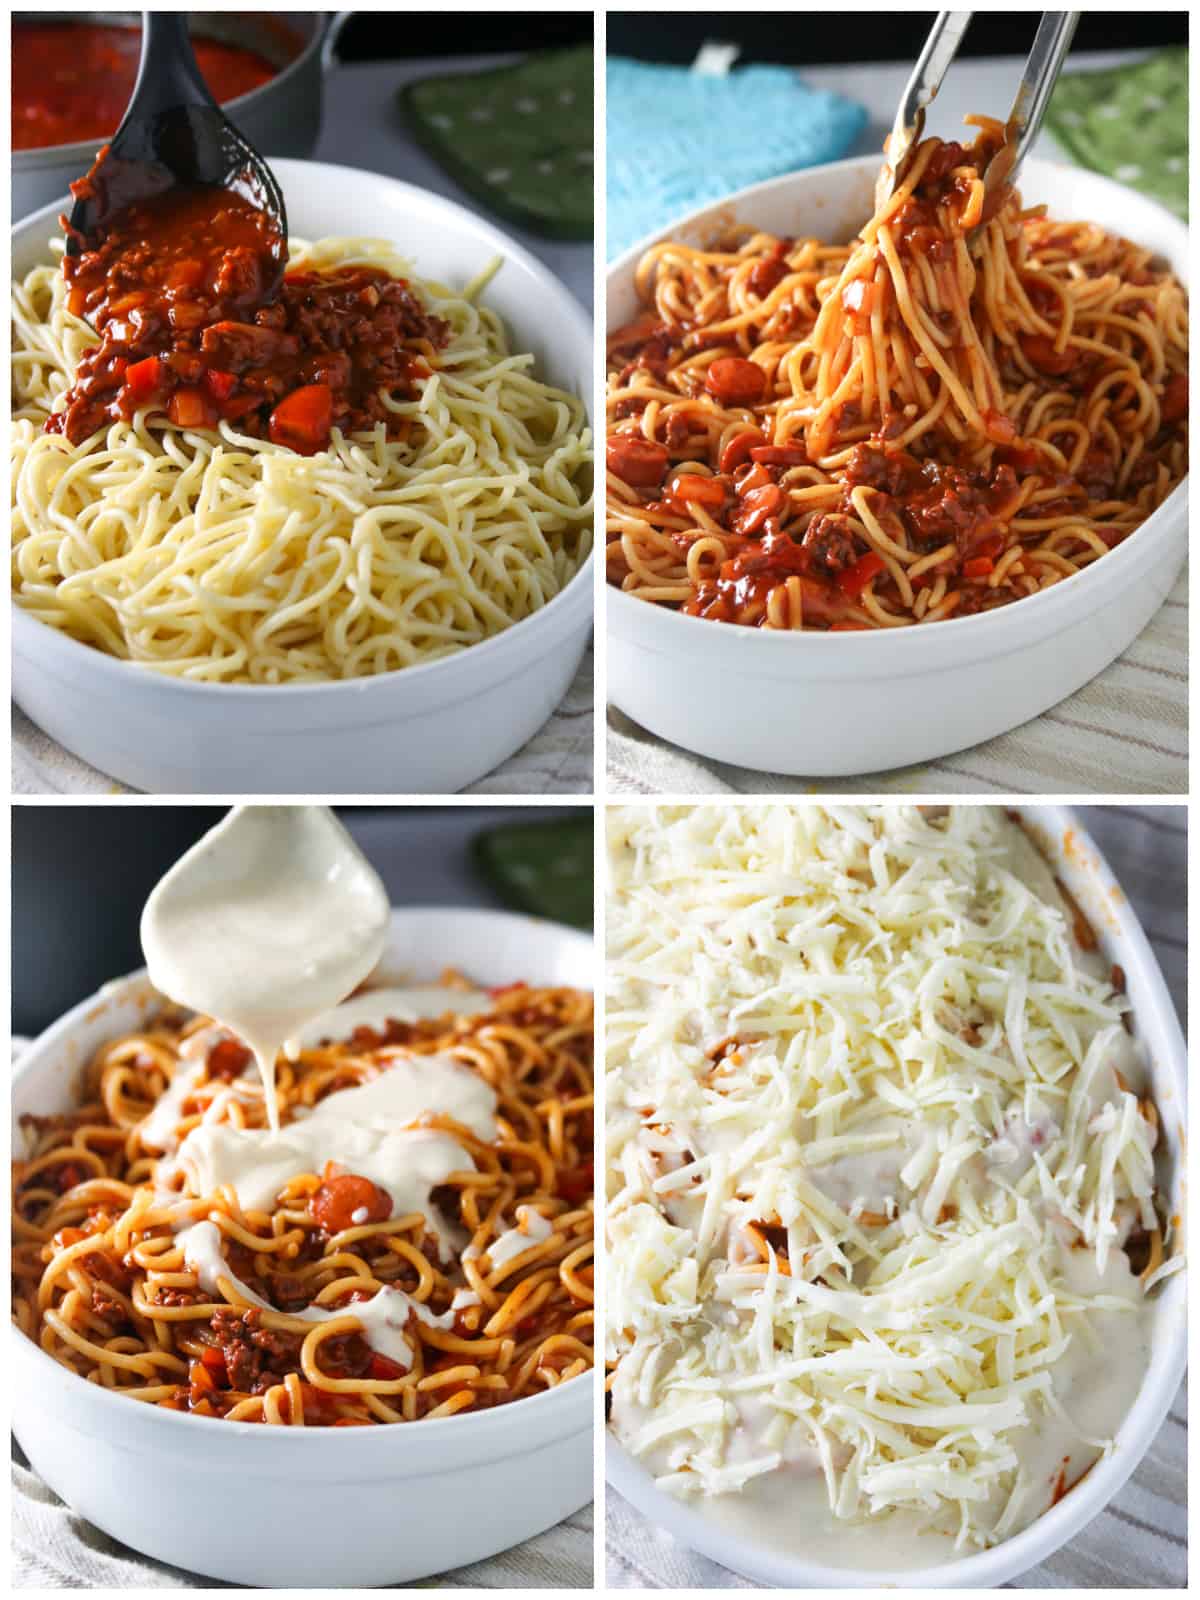 A collage showing the process of mixing the spaghetti sauce and pasta, and topping it with white sauce and cheese.